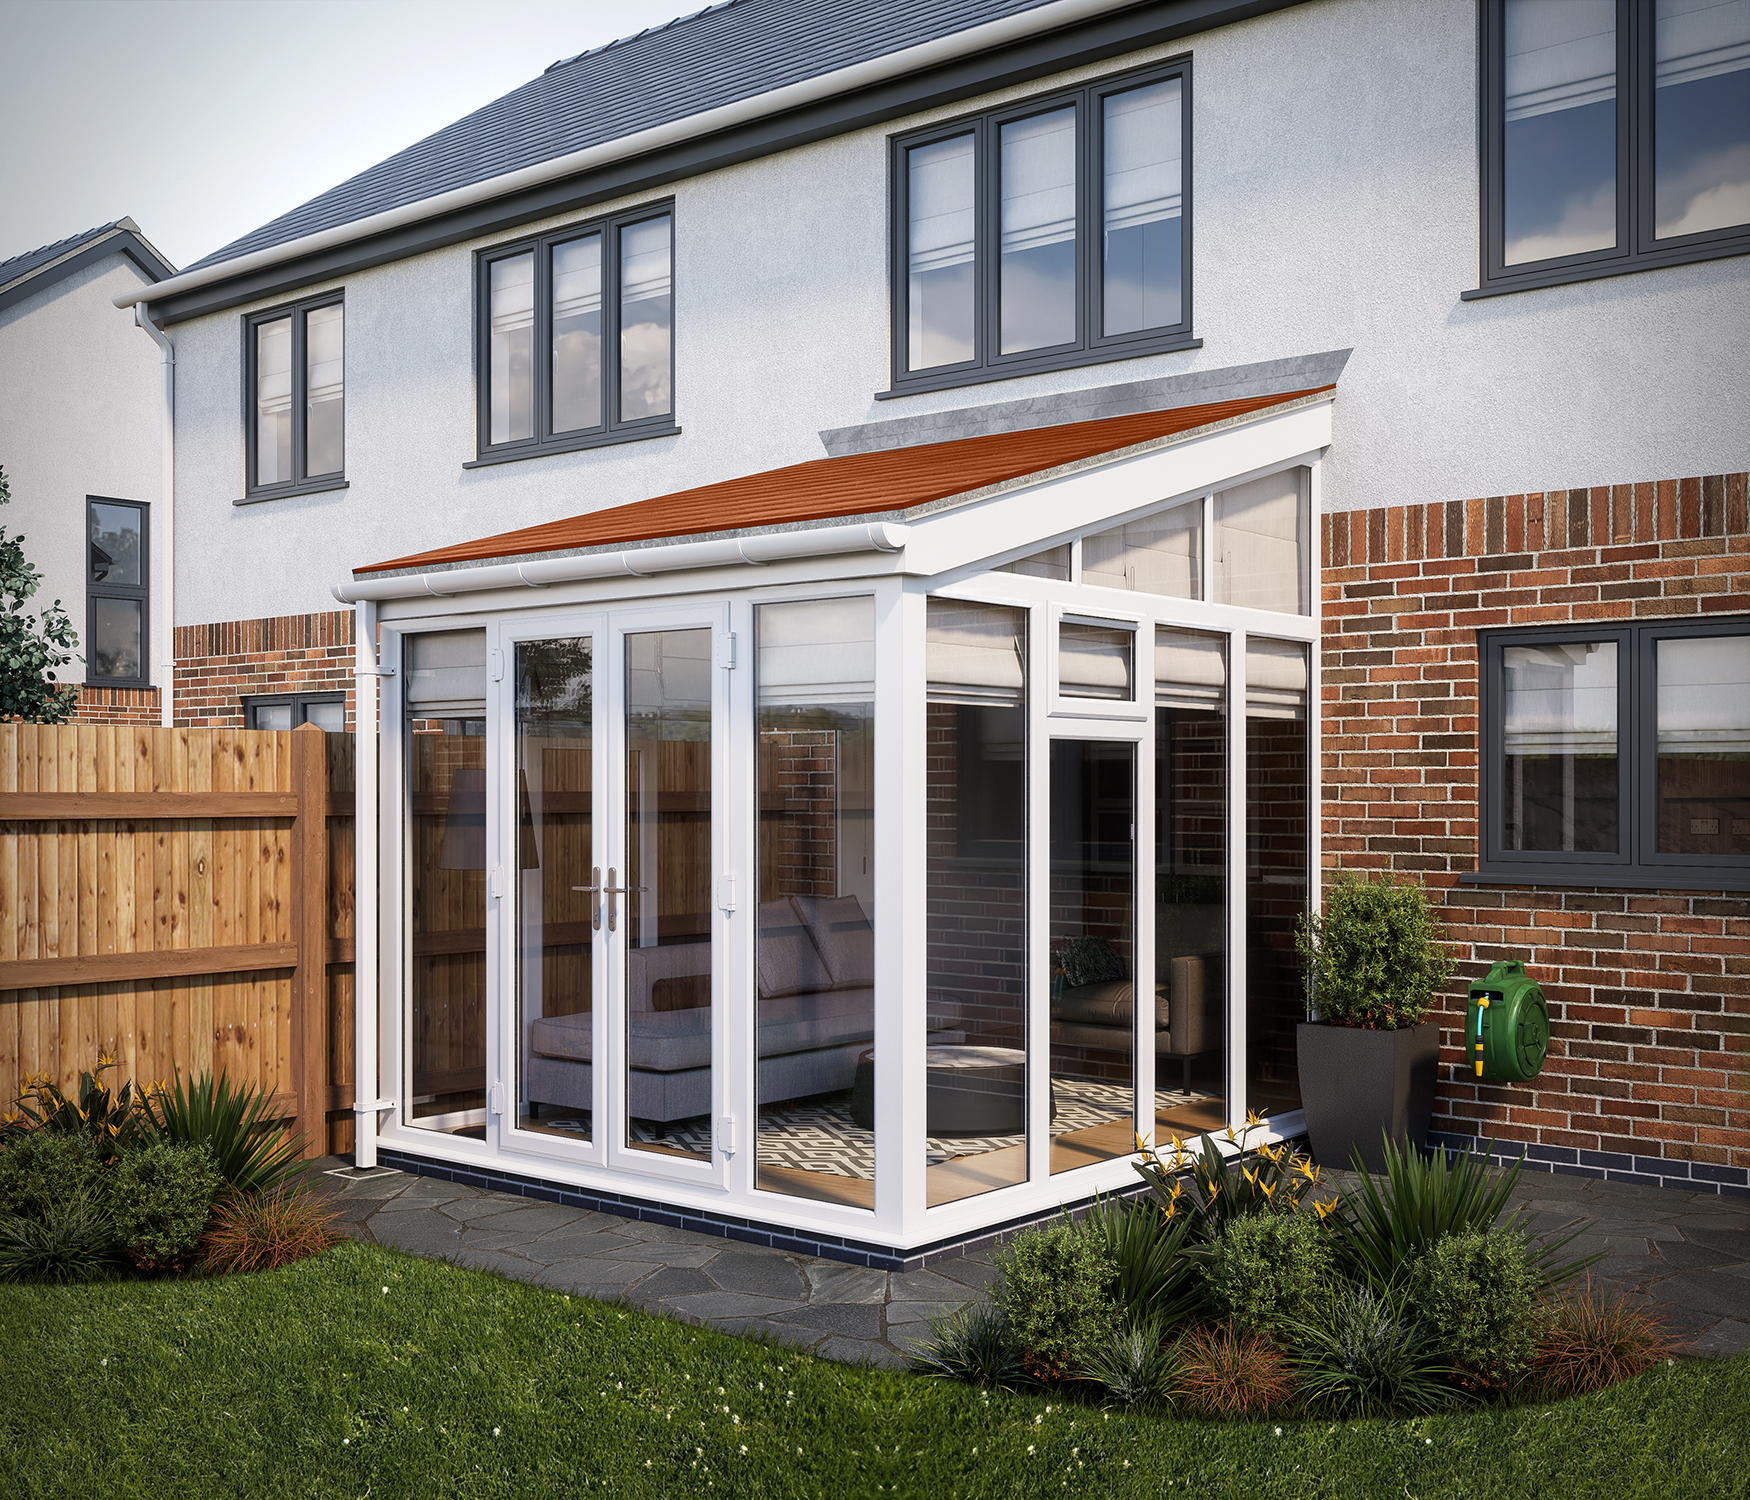 Image of SOLid Roof Full Height Lean to Conservatory White Frames with Rustic Terracotta Tiles - 13 x 13ft